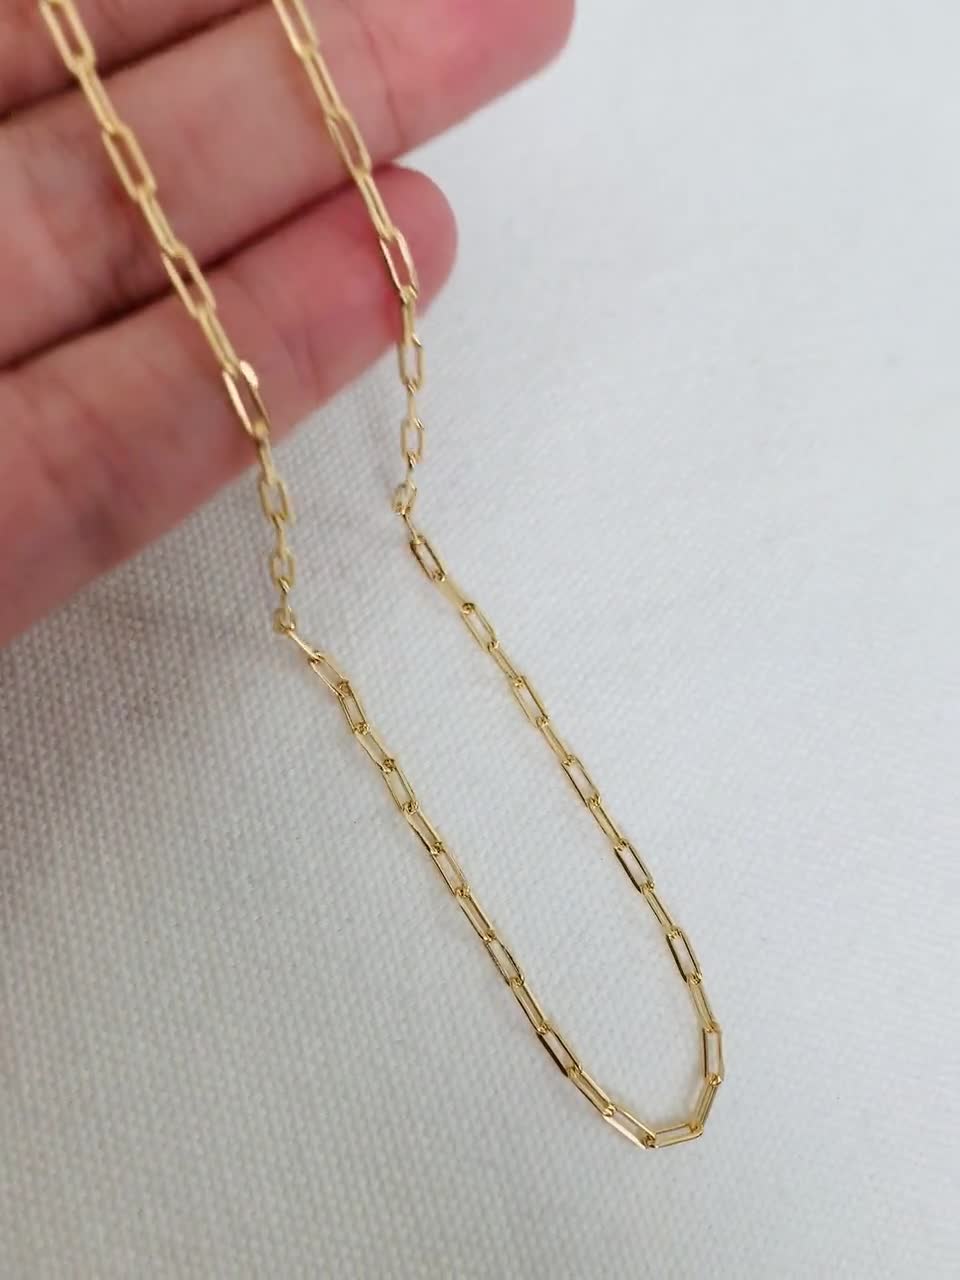 14k Gold Filled chain everyday necklace yellow necklace Gift For Her simple necklace Wire wrapped gold necklace Pastel Jewelry